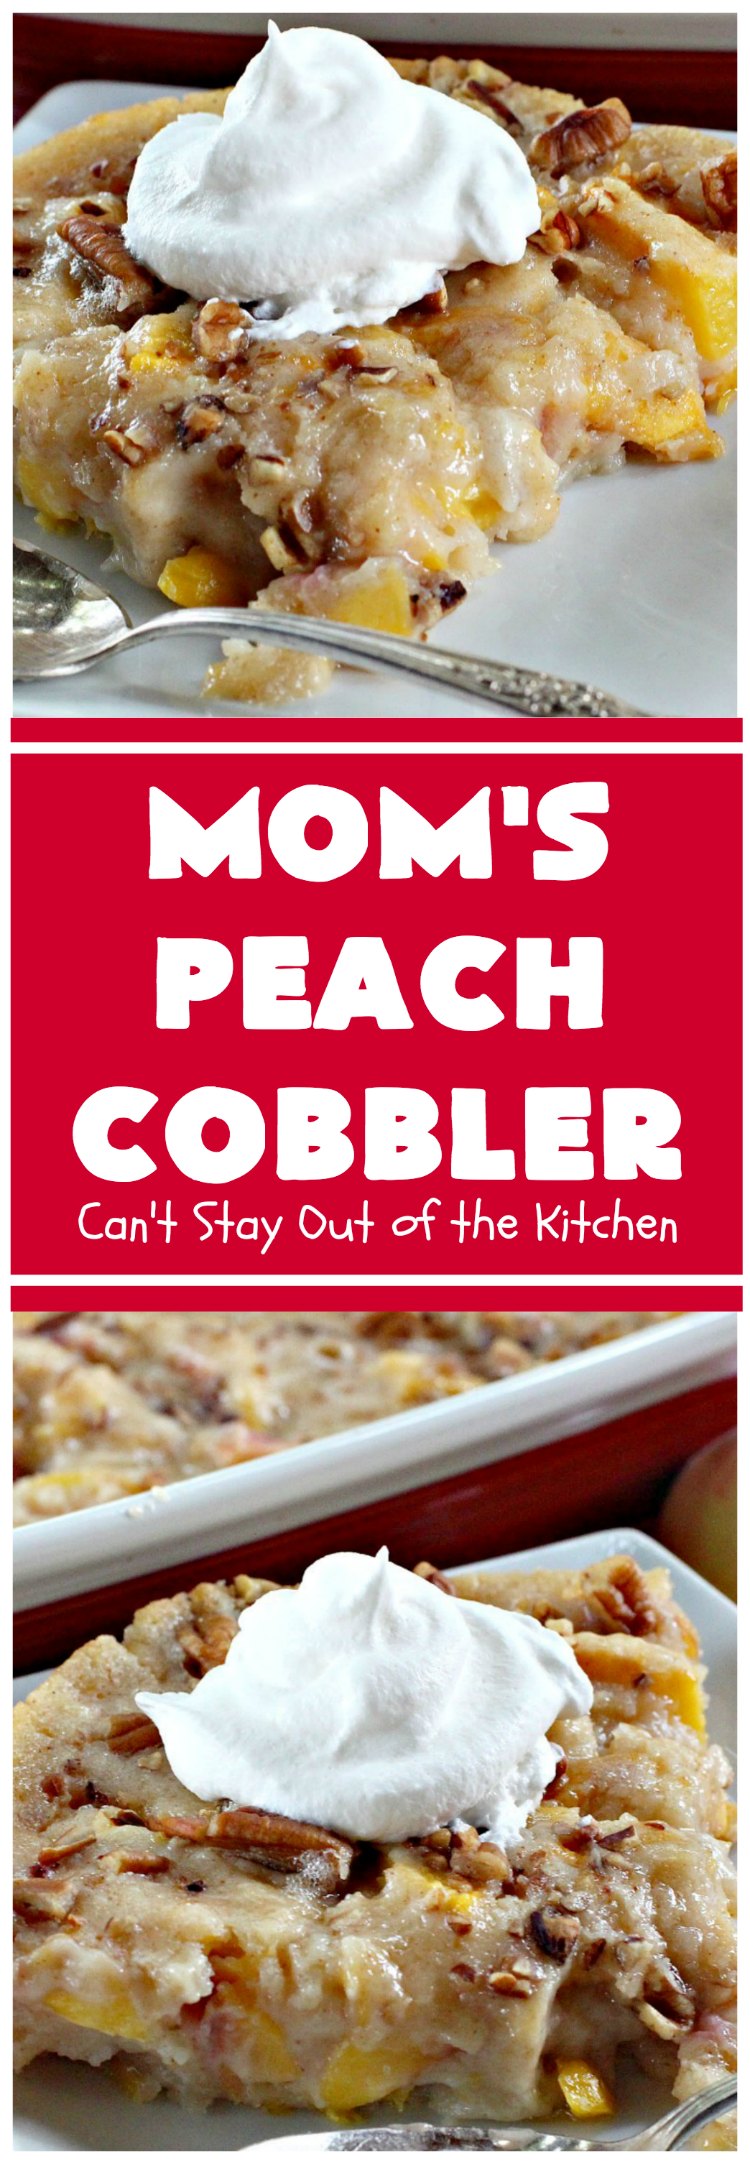 Mom's Peach Cobbler | Can't Stay Out of the Kitchen